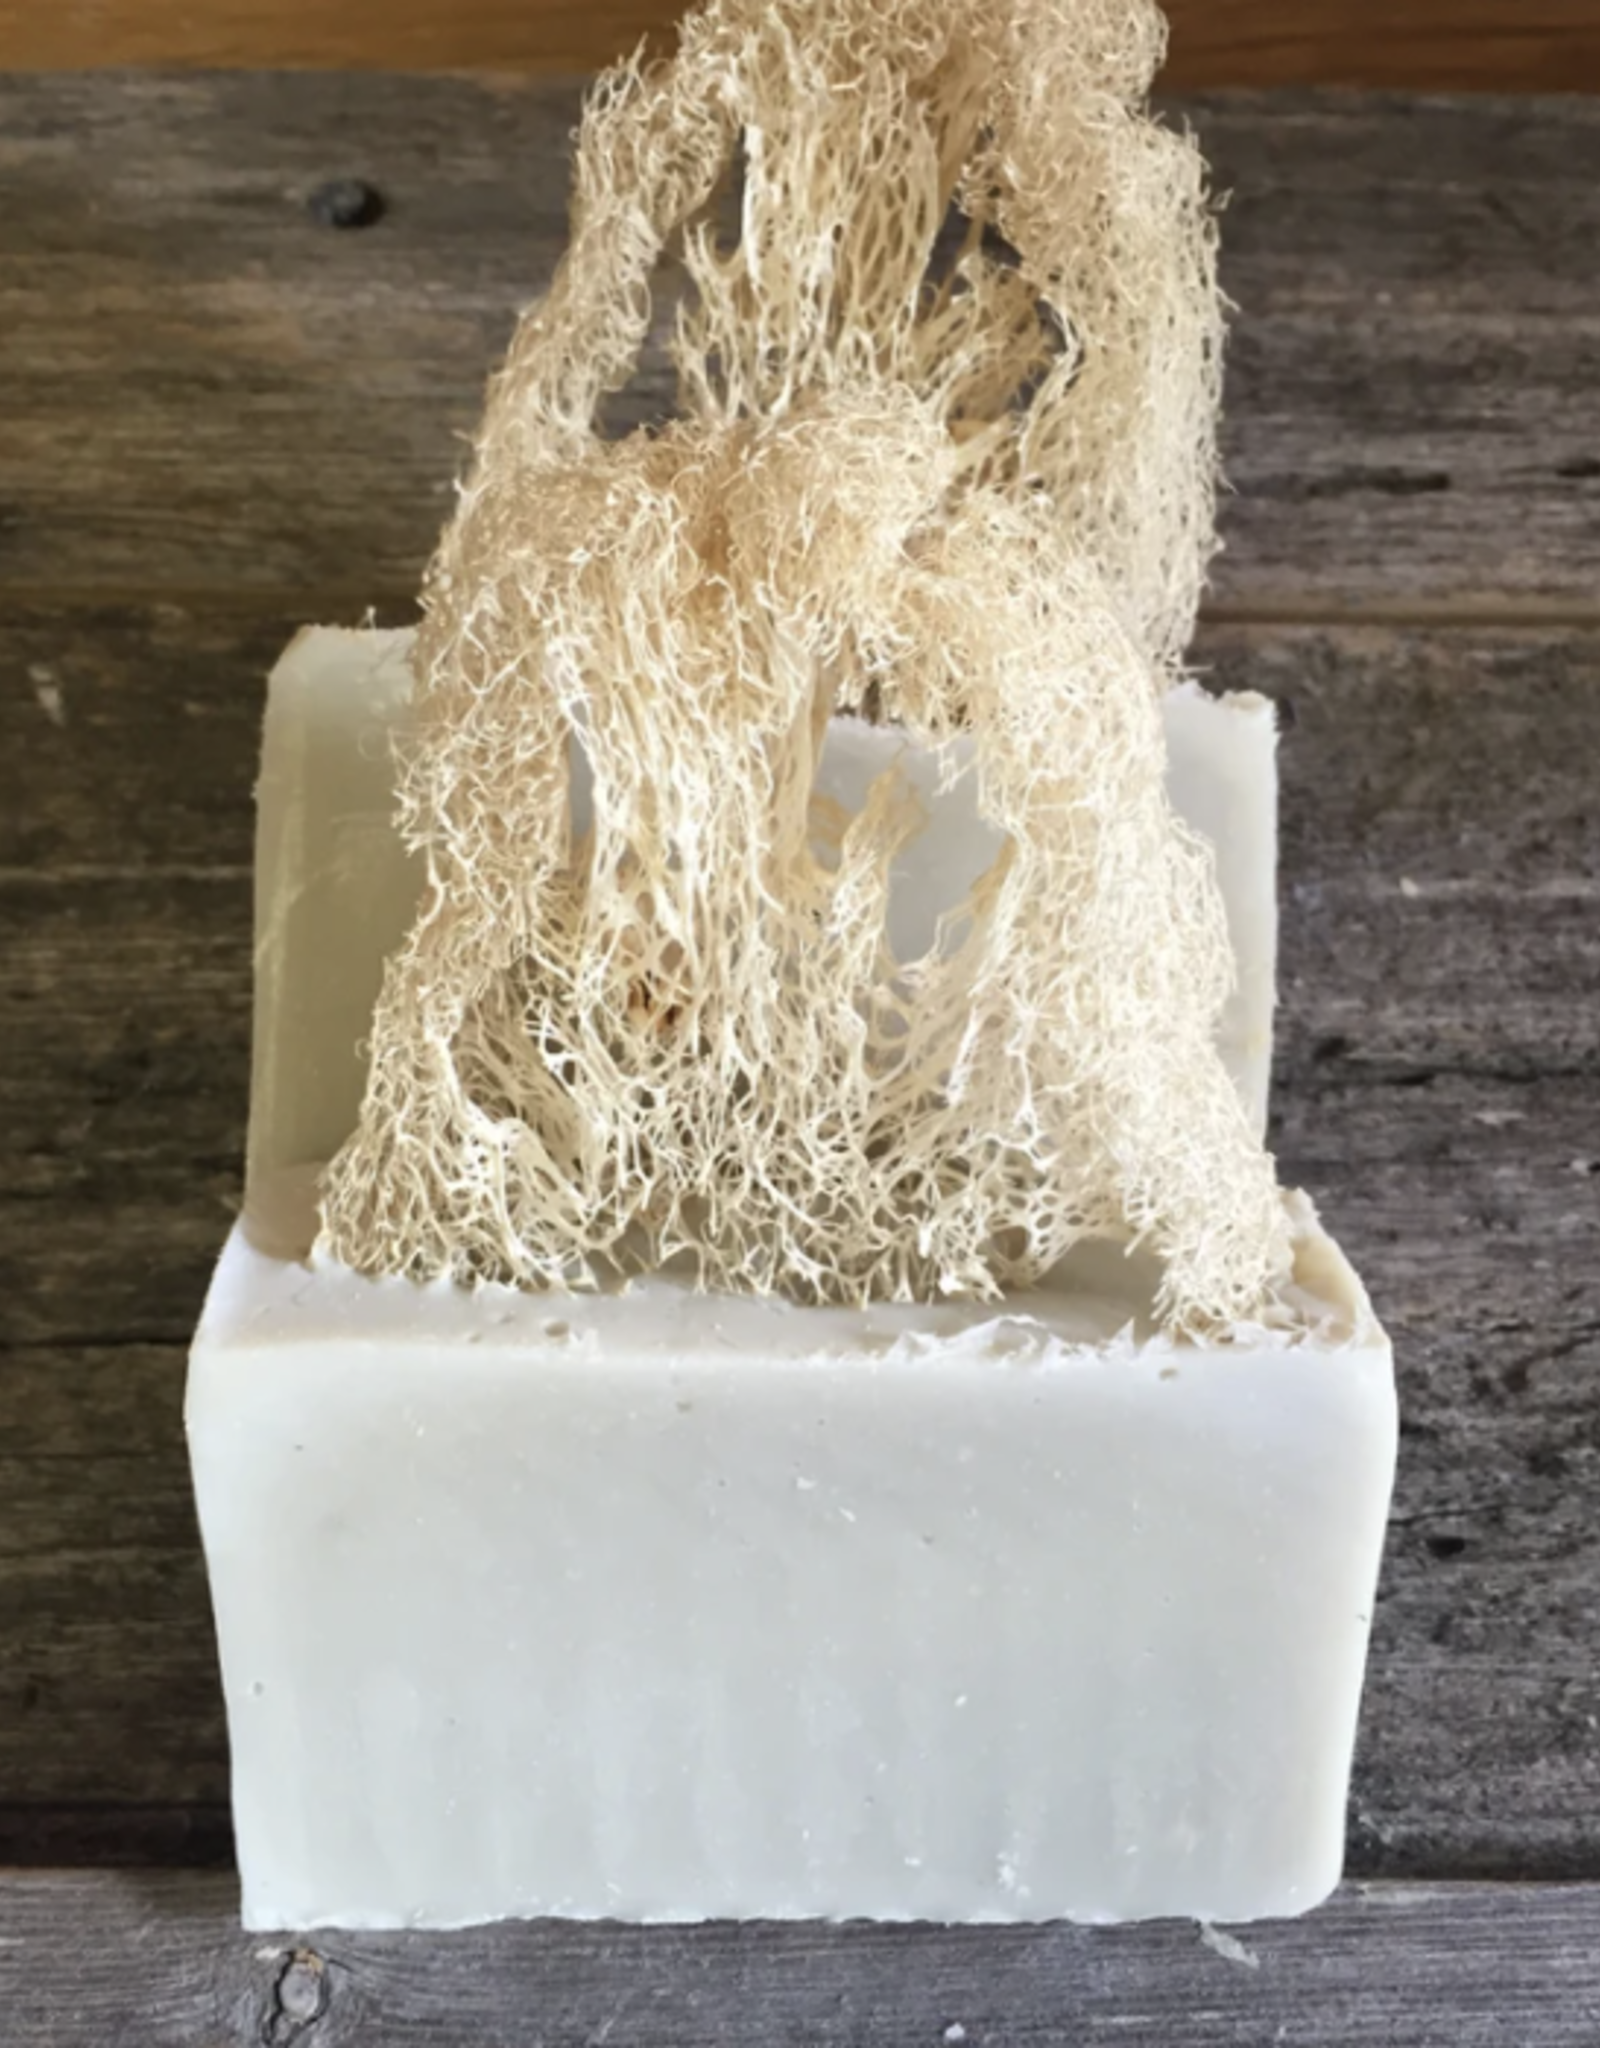 Scrubbed Earth Soap (Loofah) by Soco Soaps